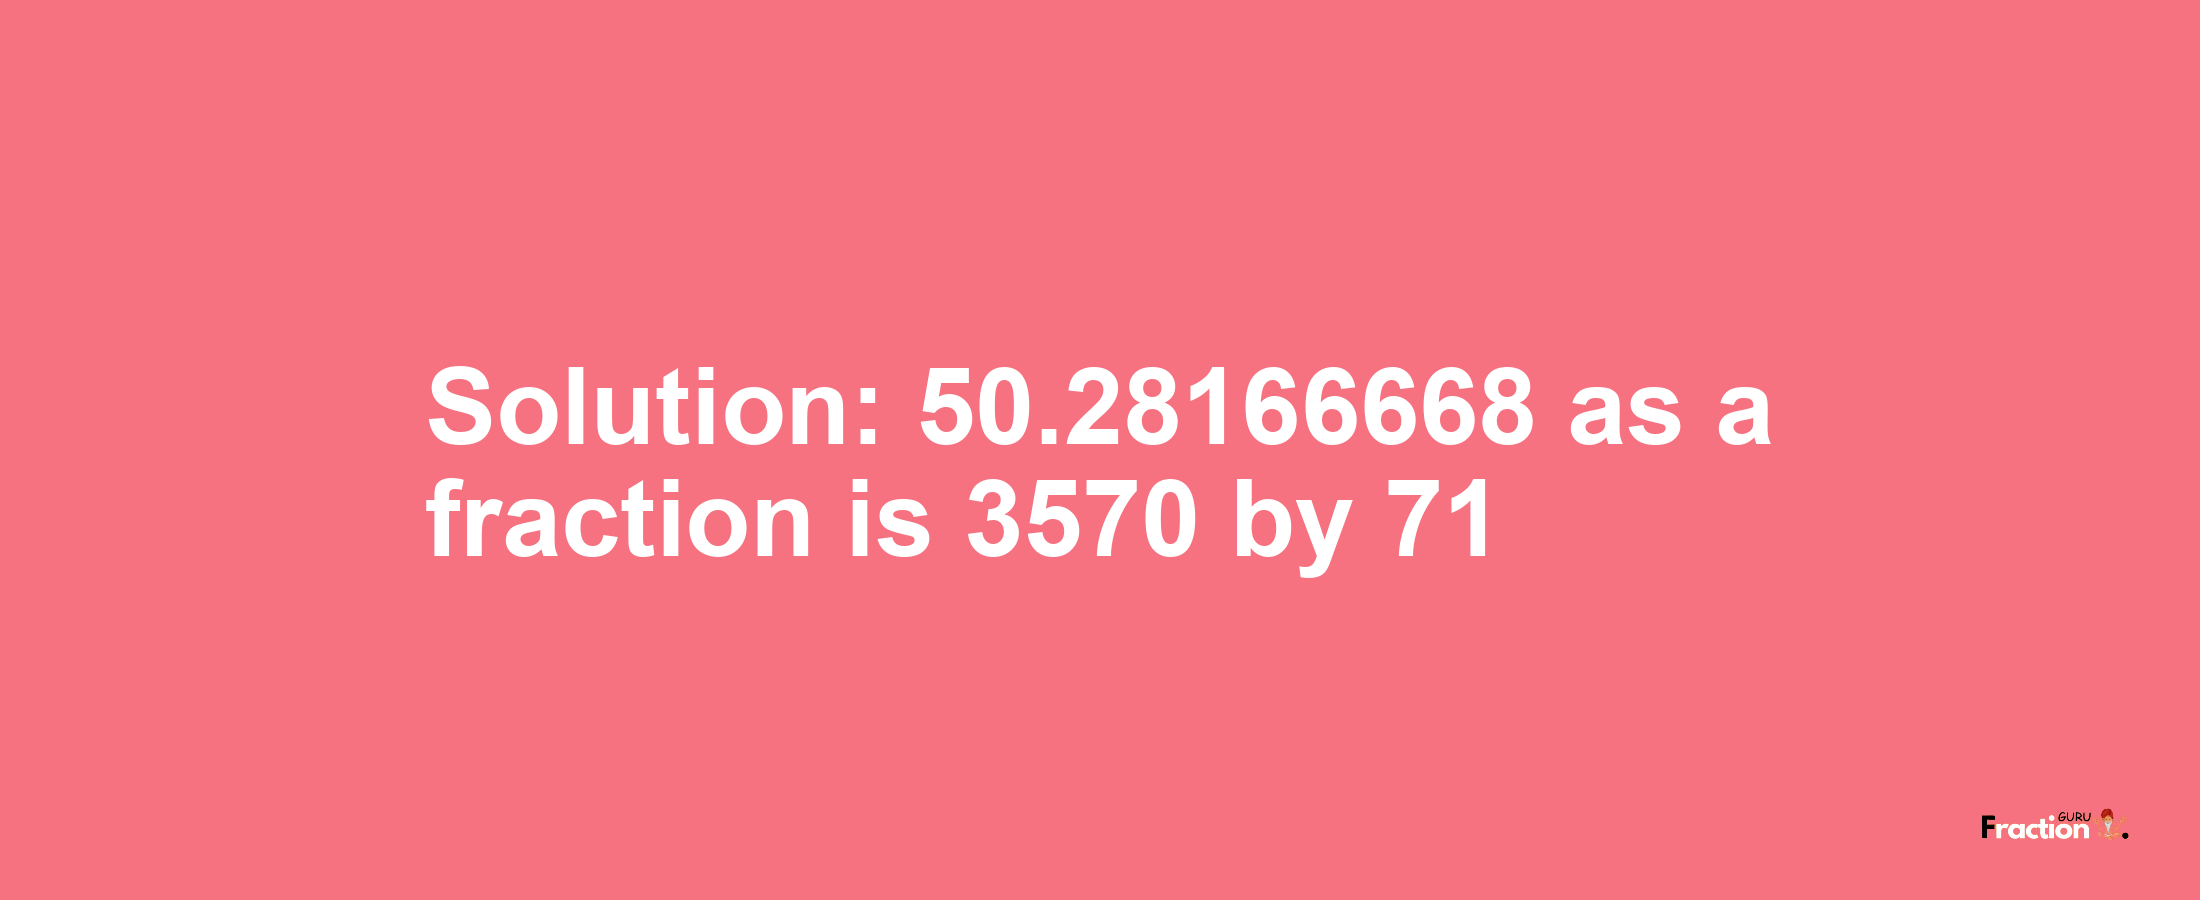 Solution:50.28166668 as a fraction is 3570/71